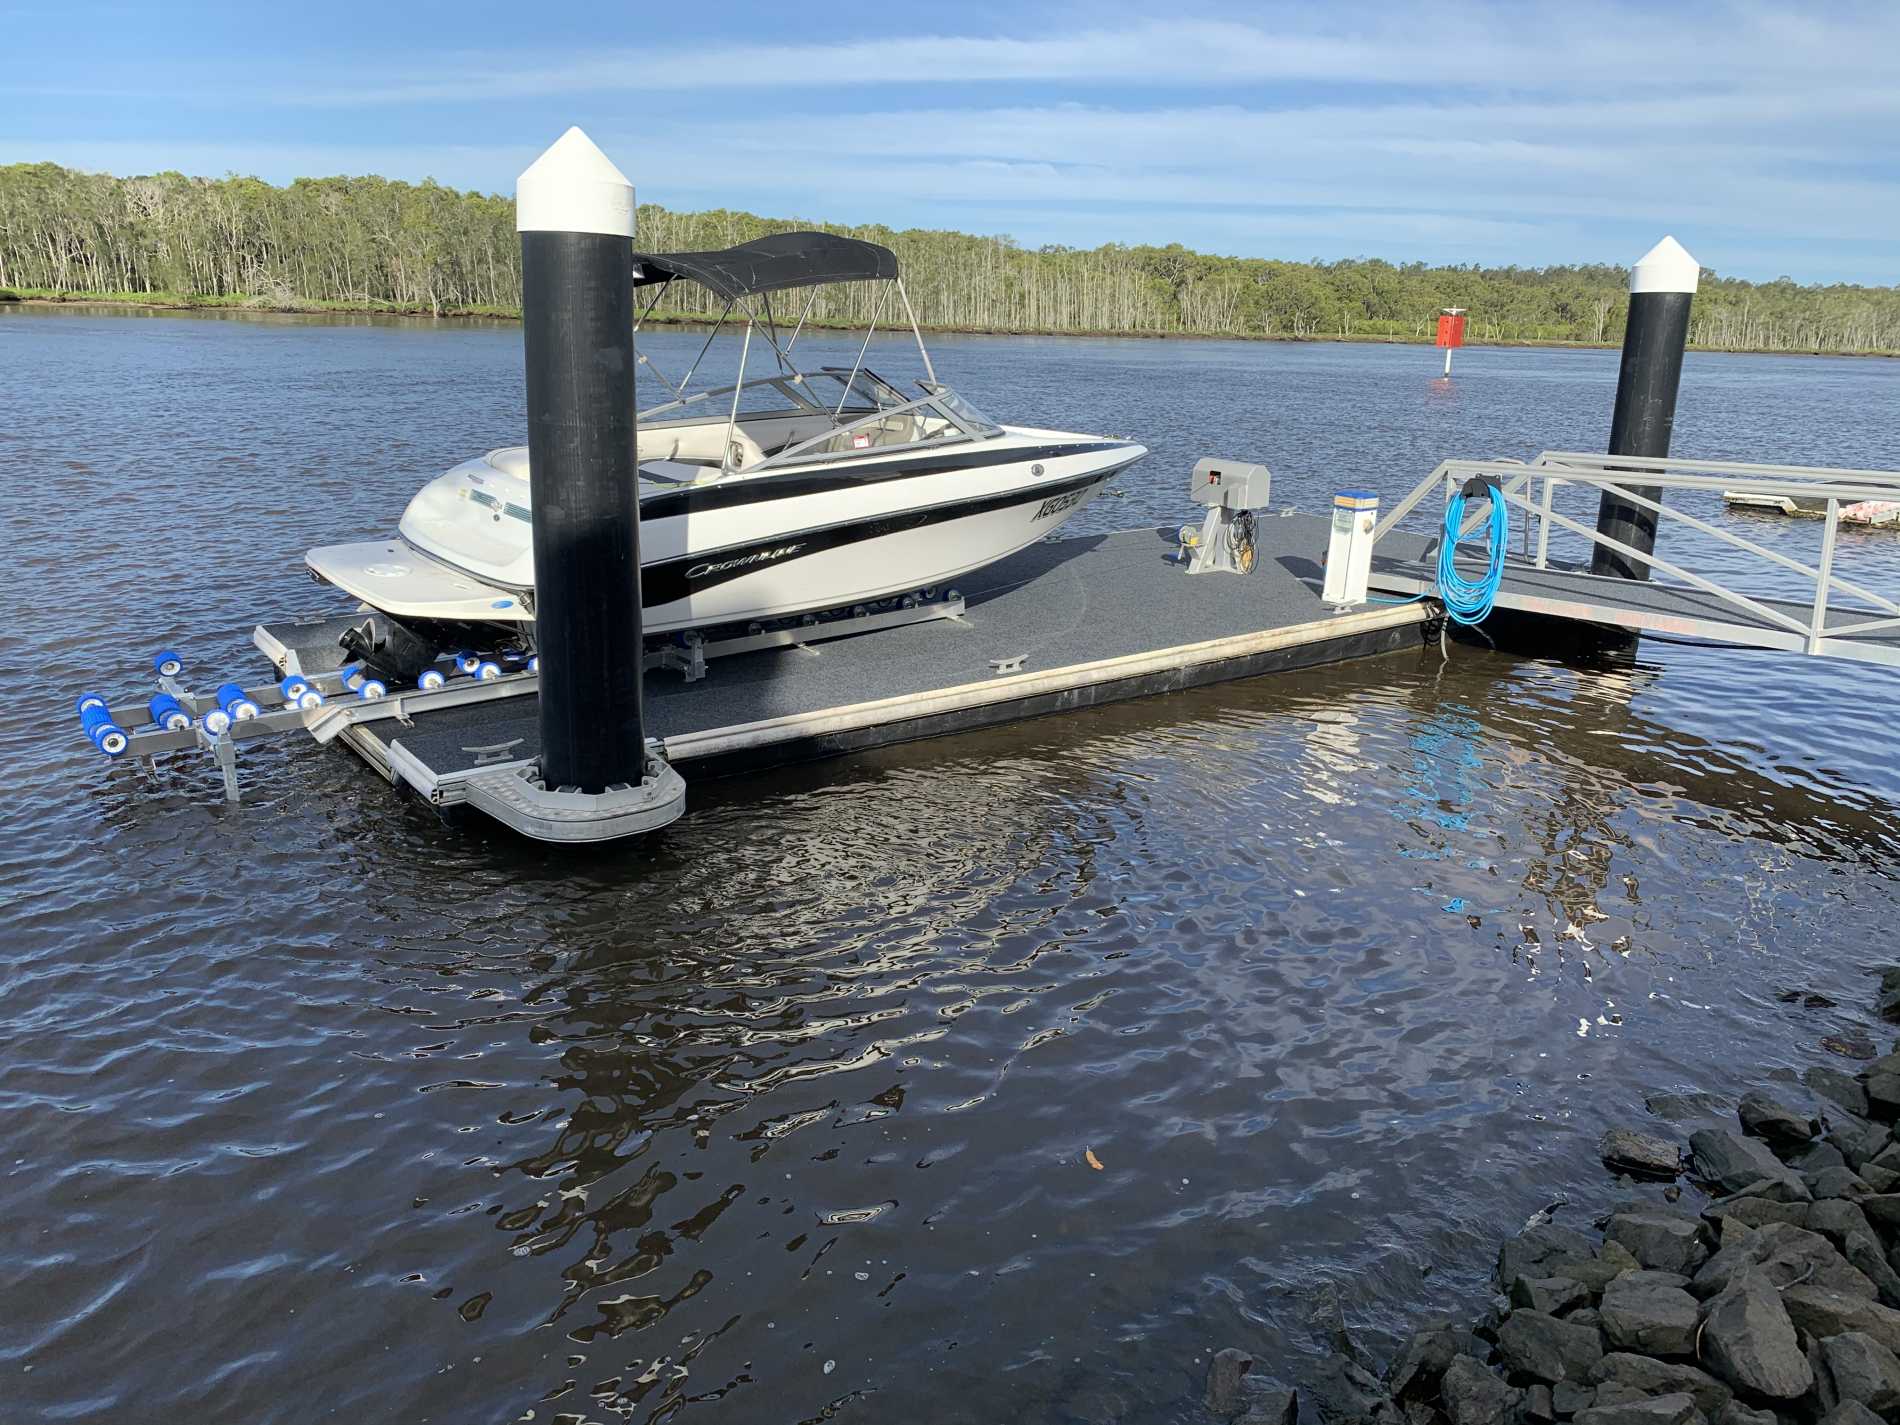 10 Things You Didn't Know About Pontoon Docks